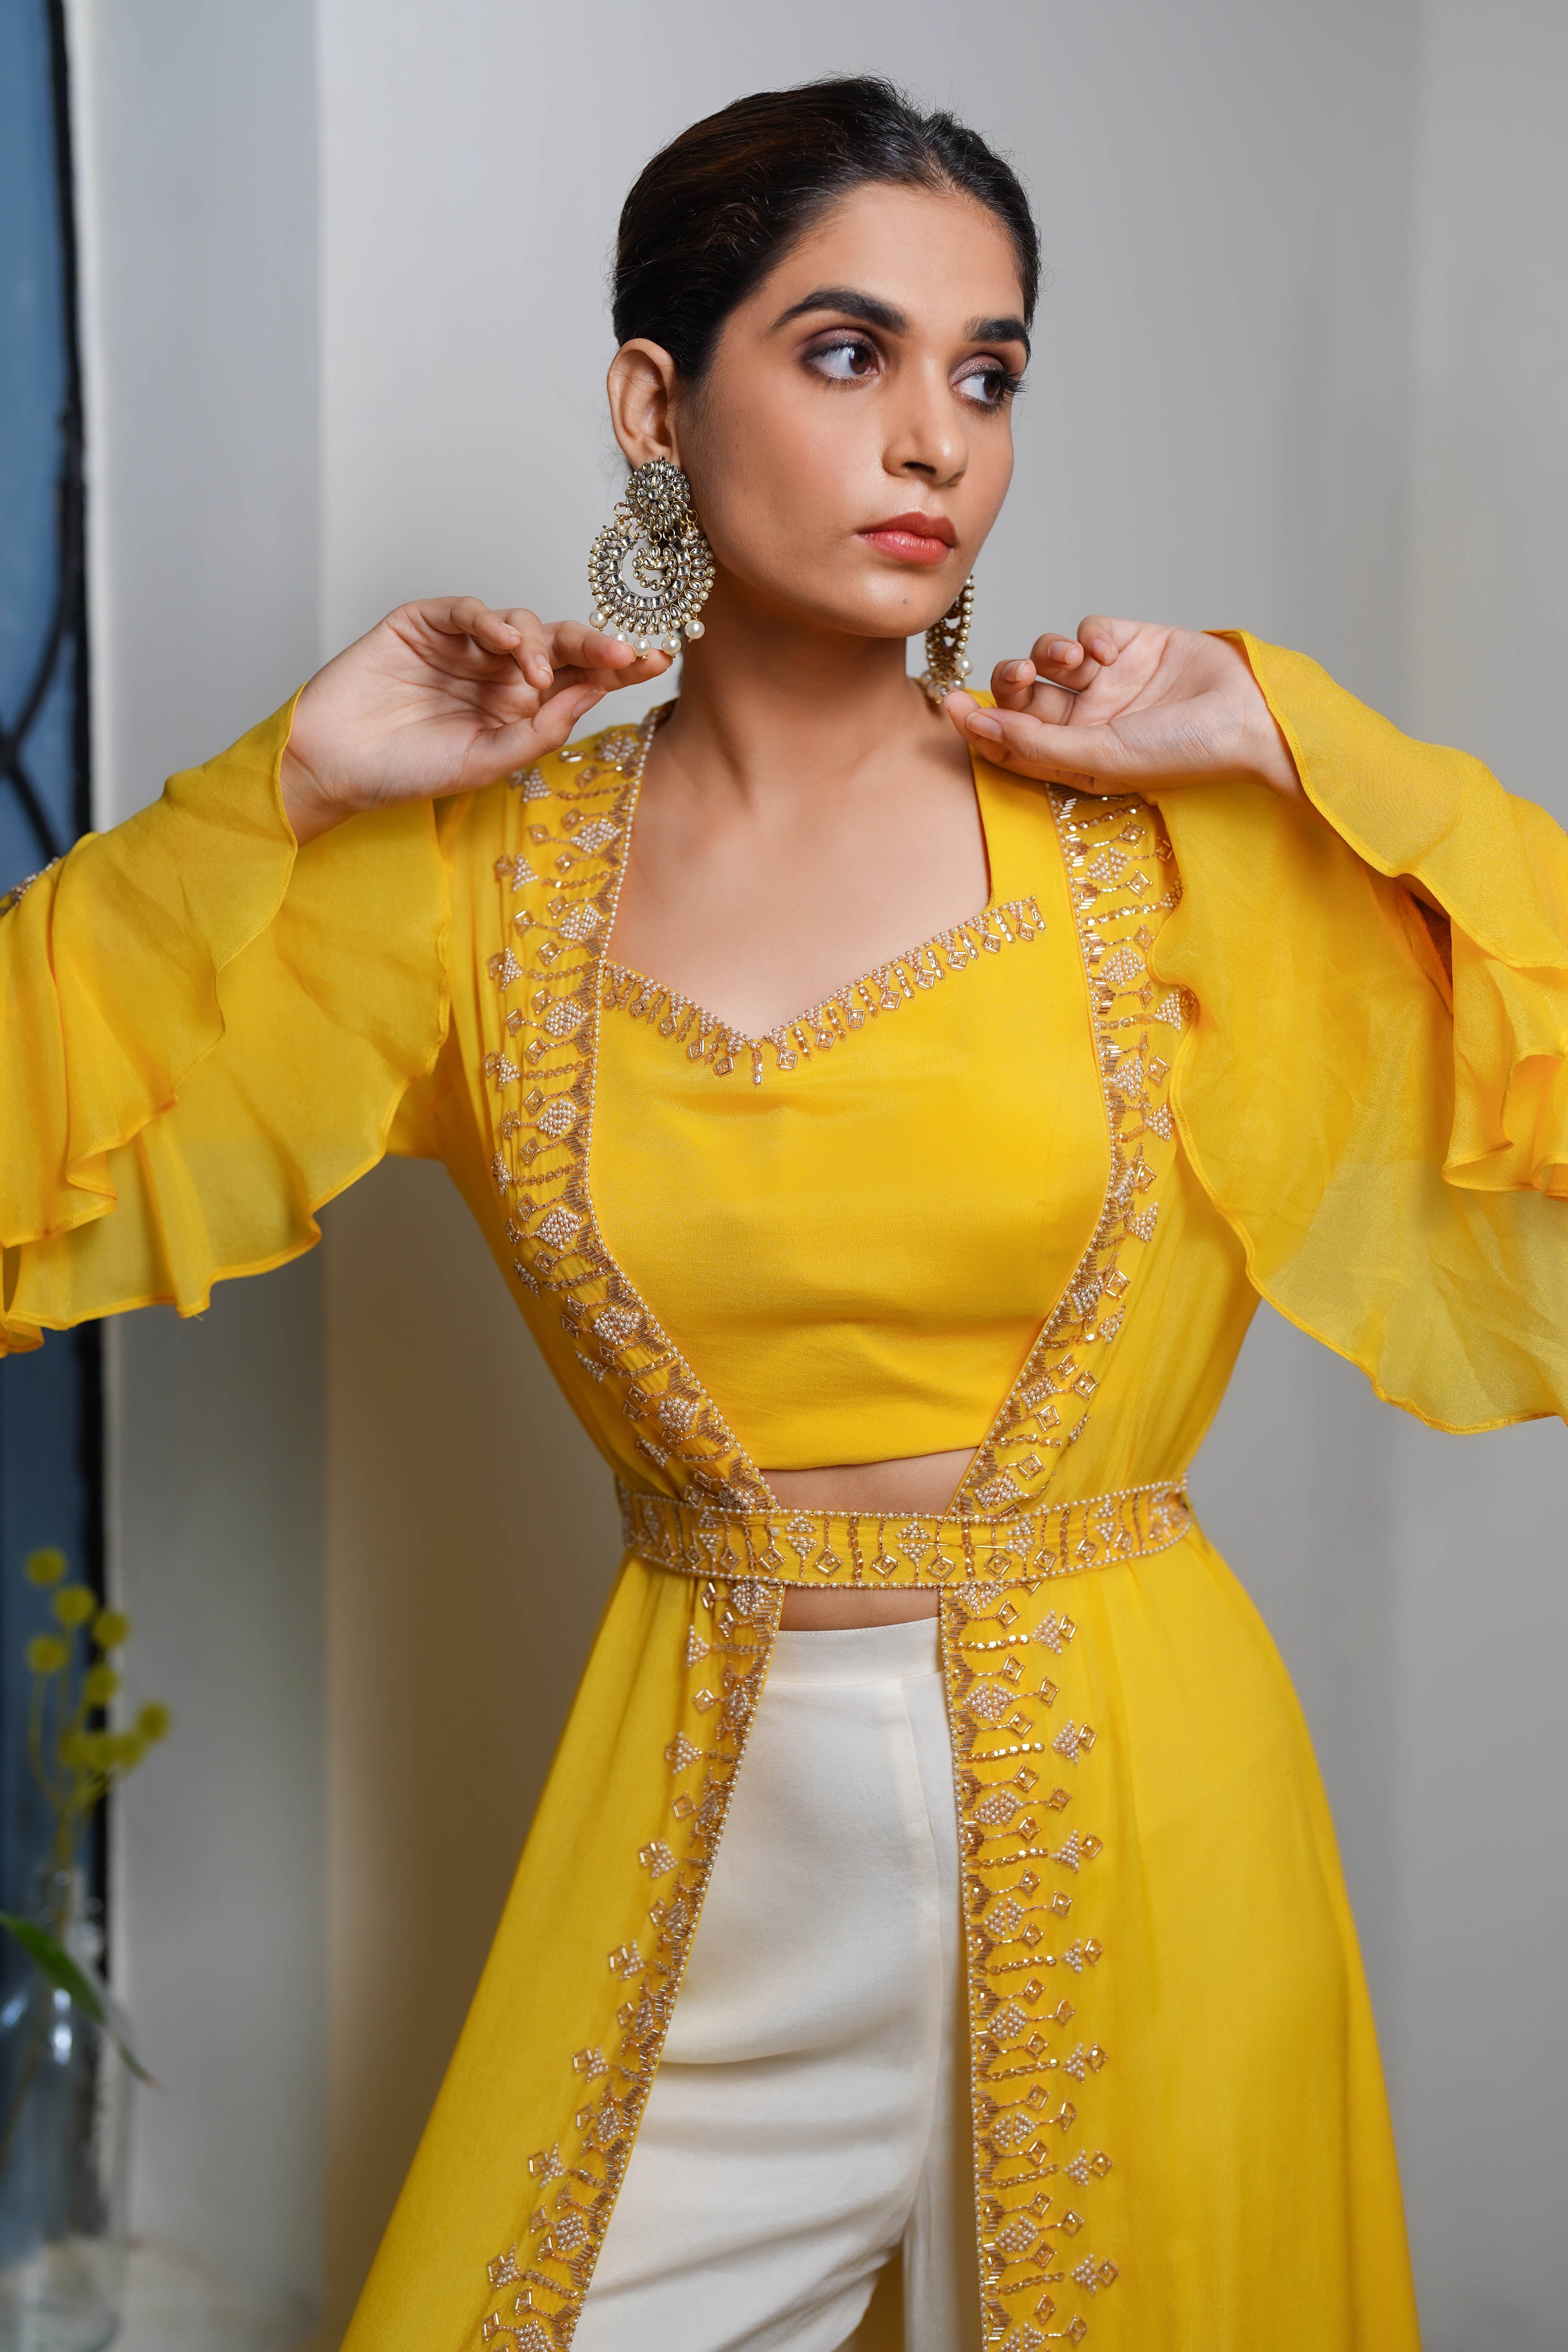 Cilory.com - Beautiful embroidered yellow kurti with... | Facebook